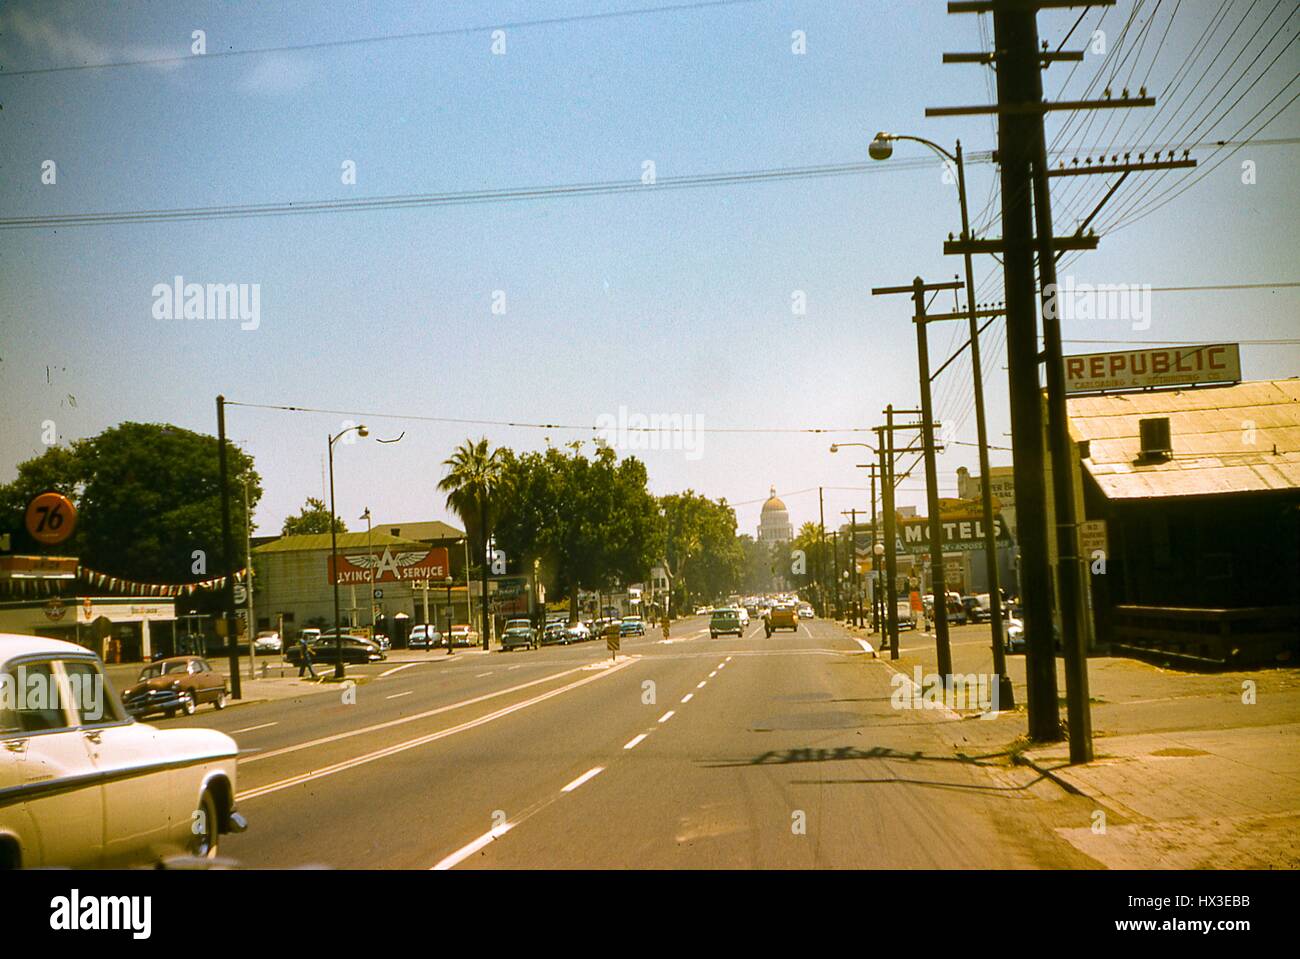 The California State Capitol building can be seen in the distance when looking down this this busy street in Sacramento, California, 1955. Stock Photo